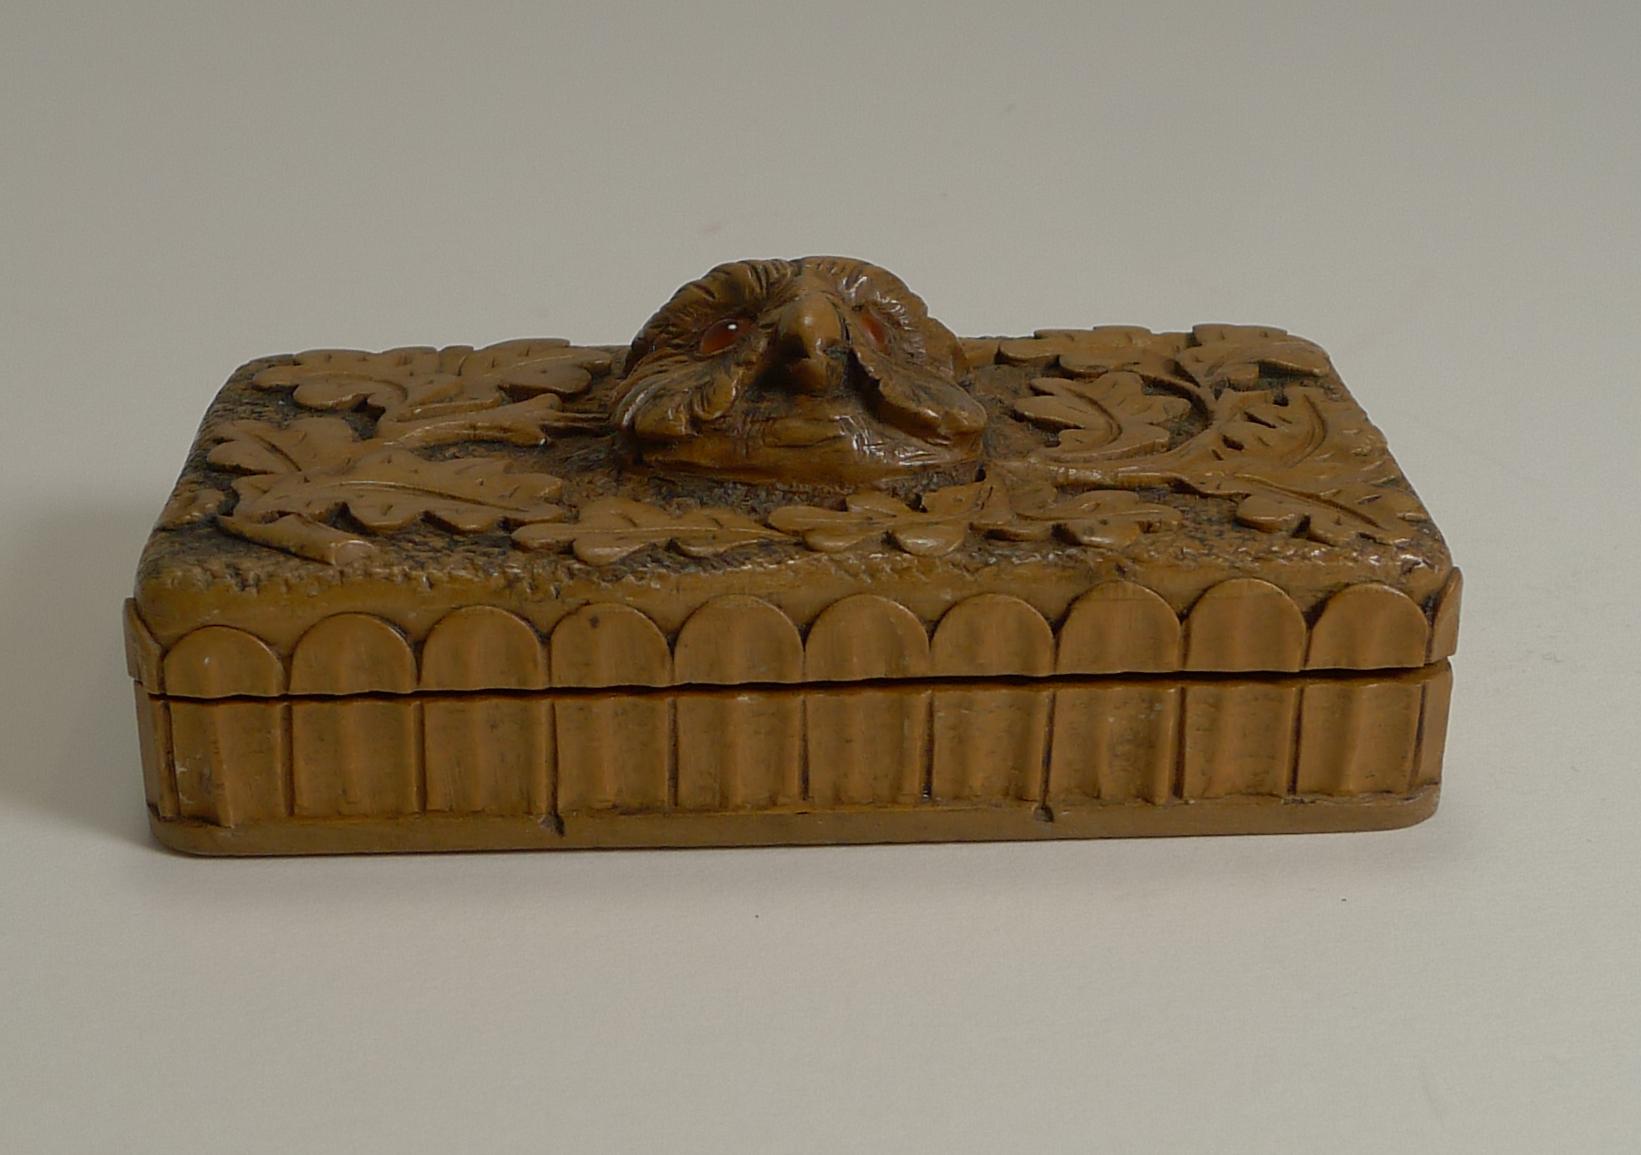 A fabulous hand carved wooden postage stamp box from the Black Forest region and dating to around 1900.

The sides are carved but the star of the show is the central carved owl to the lid surrounded by oak leaves, all beautifully